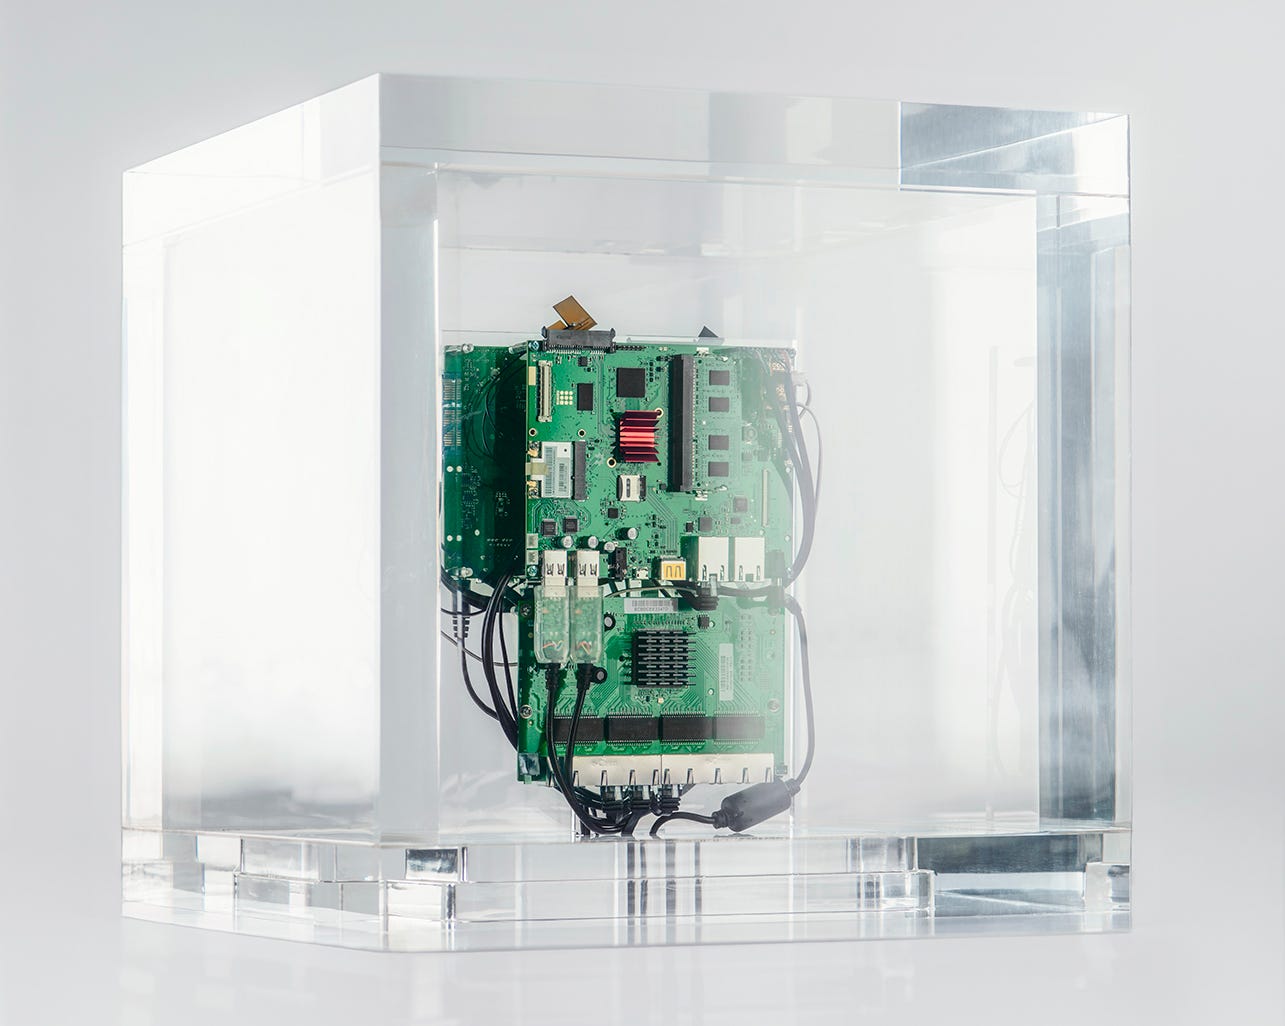 Picture of a live installation called Autonomy Cube by Trevor Paglen, comprising a clear perspex cube containing an electronic circuit board that is a working encrypted Wifi networking running through Tor.